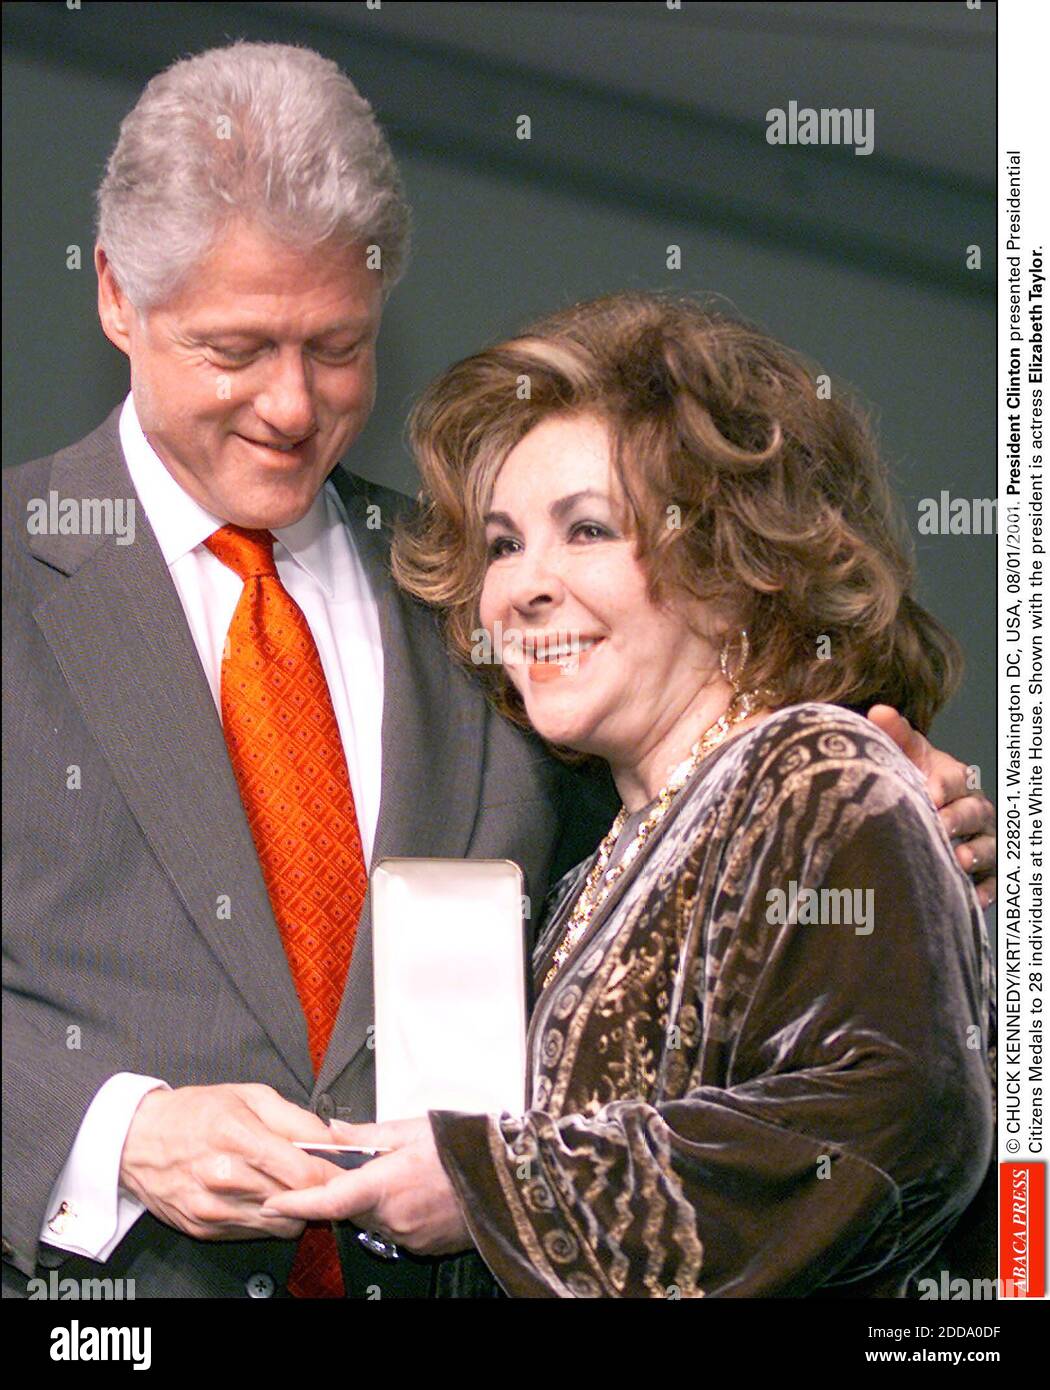 NO FILM, NO VIDEO, NO TV, NO DOCUMENTARY - © CHUCK KENNEDY/KRT/ABACA. 22820-1. Washington DC, USA, 08/01/2001. President Clinton presented Presidential Citizens Medals to 28 individuals at the White House. Shown with the president is actress Elizabeth Taylor. Stock Photo